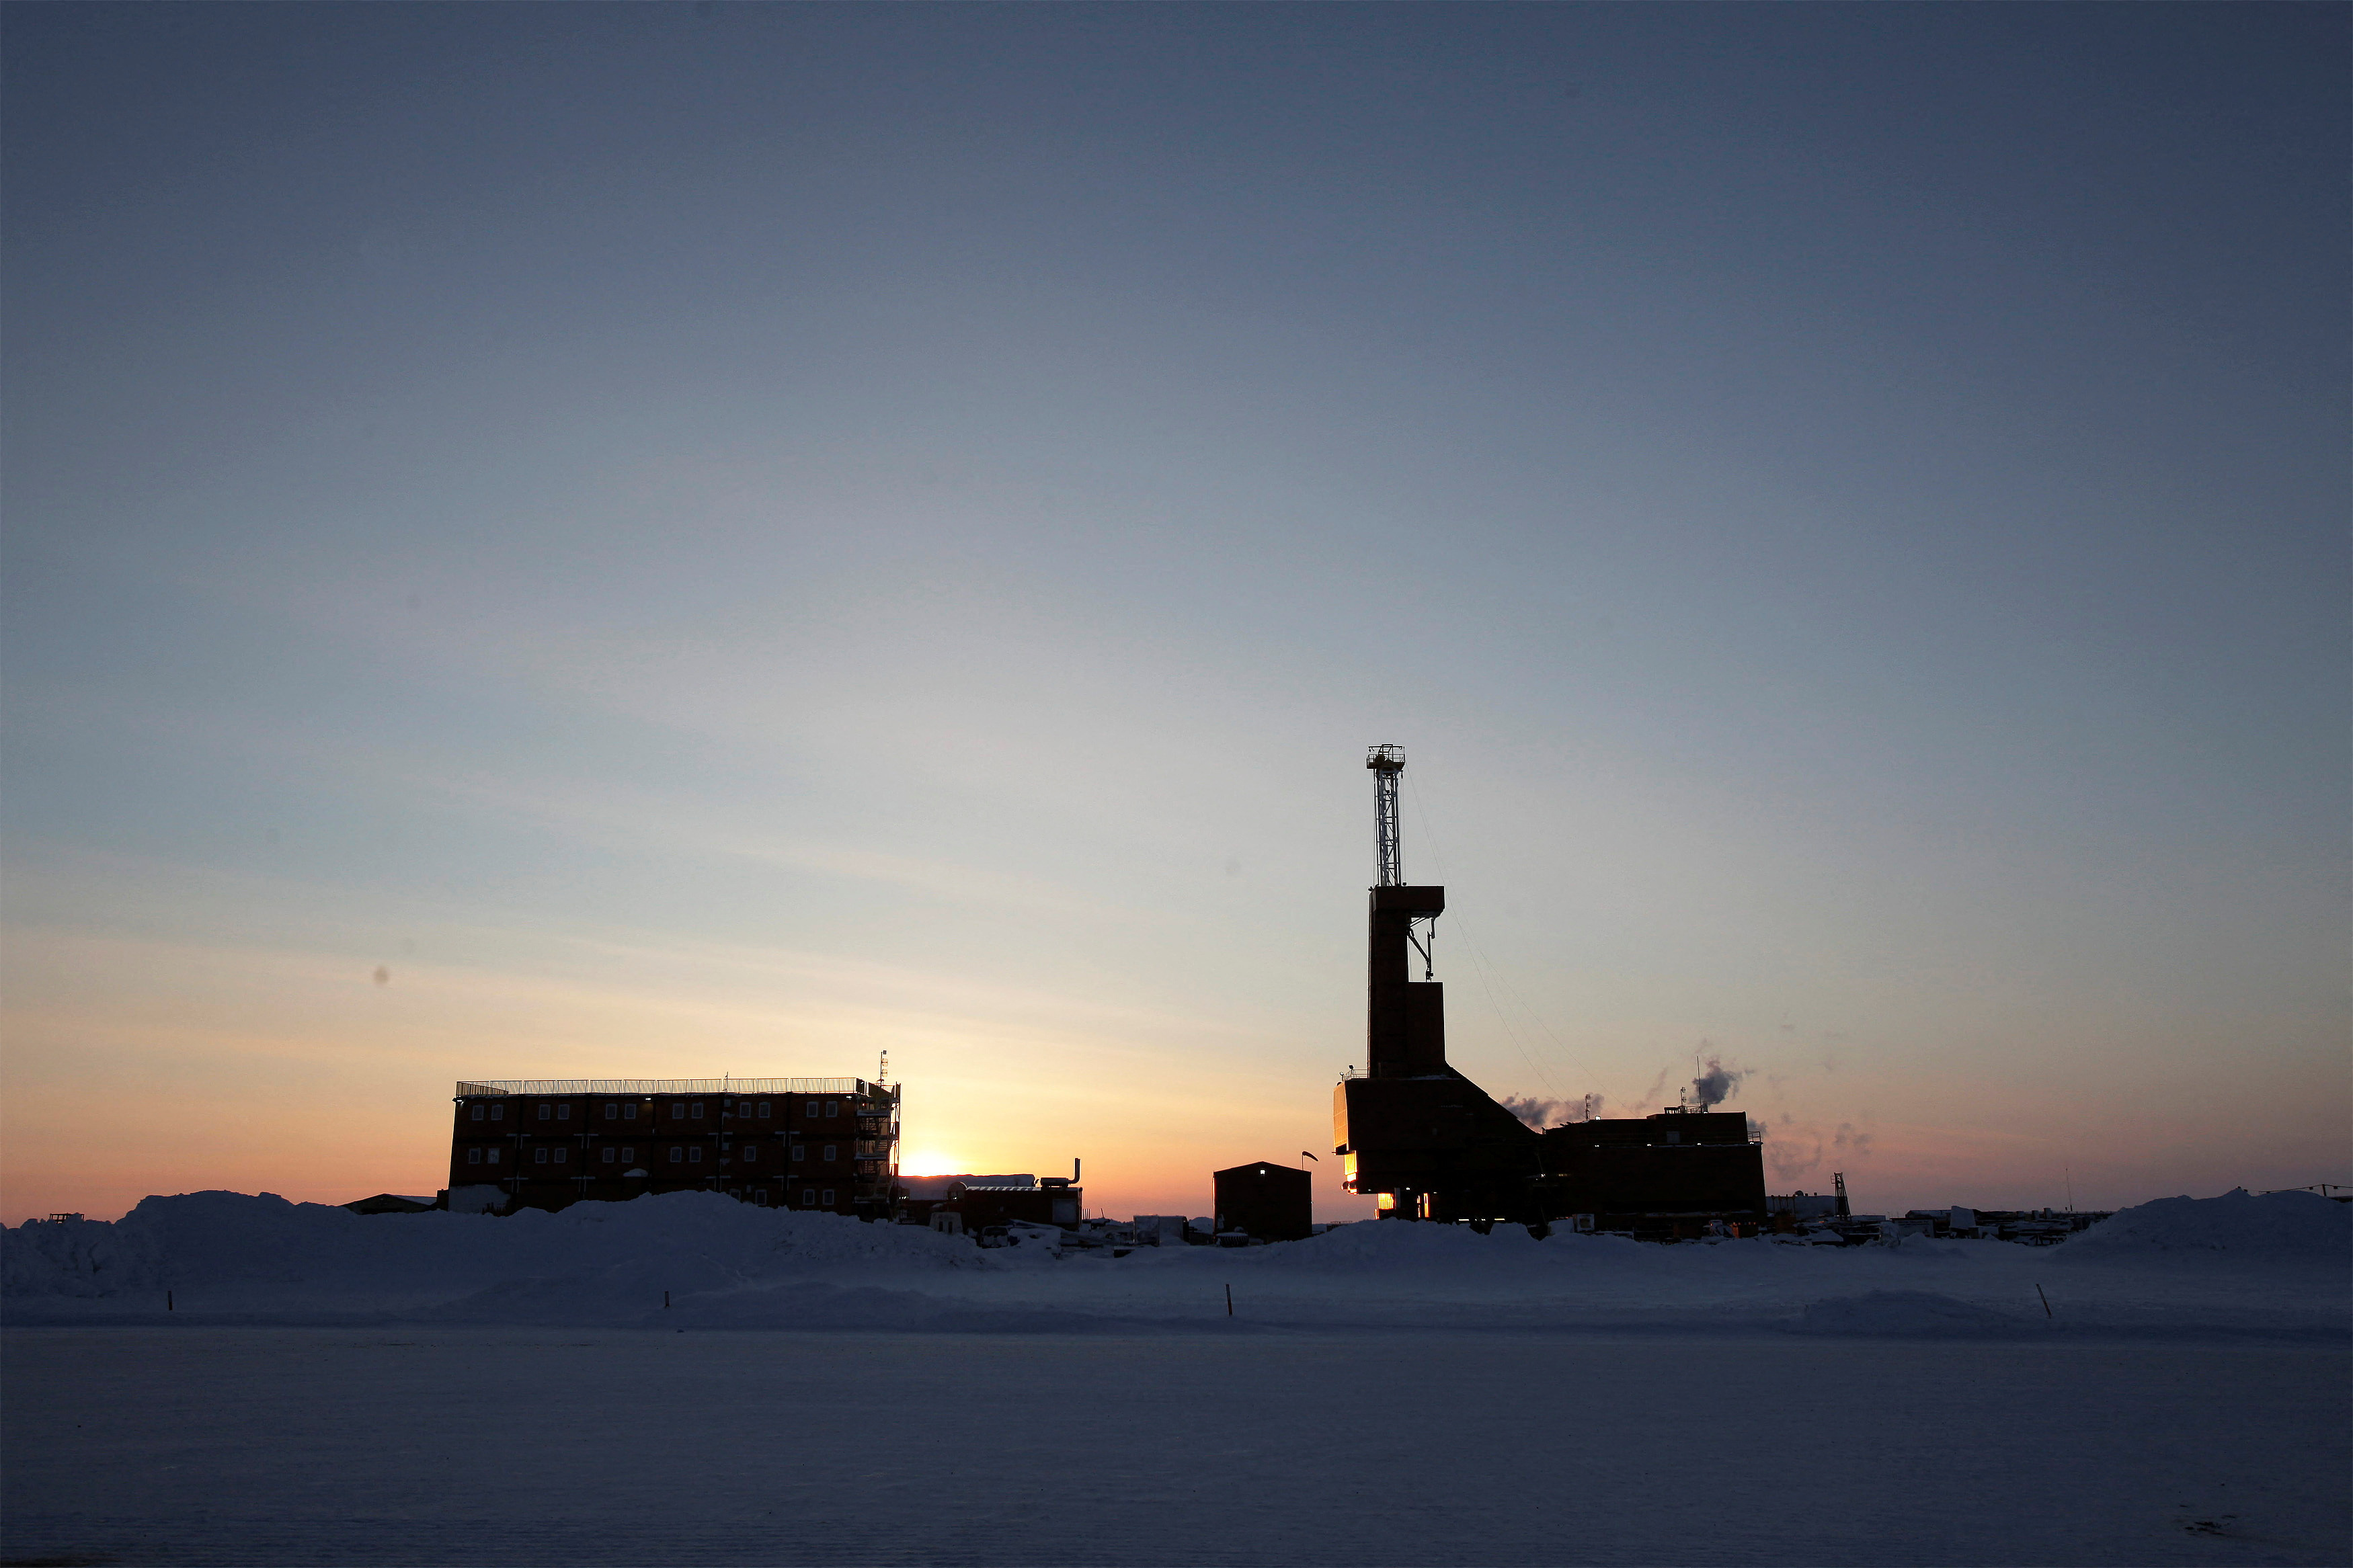 The sun sets behind an oil drilling rig in Prudhoe Bay, Alaska